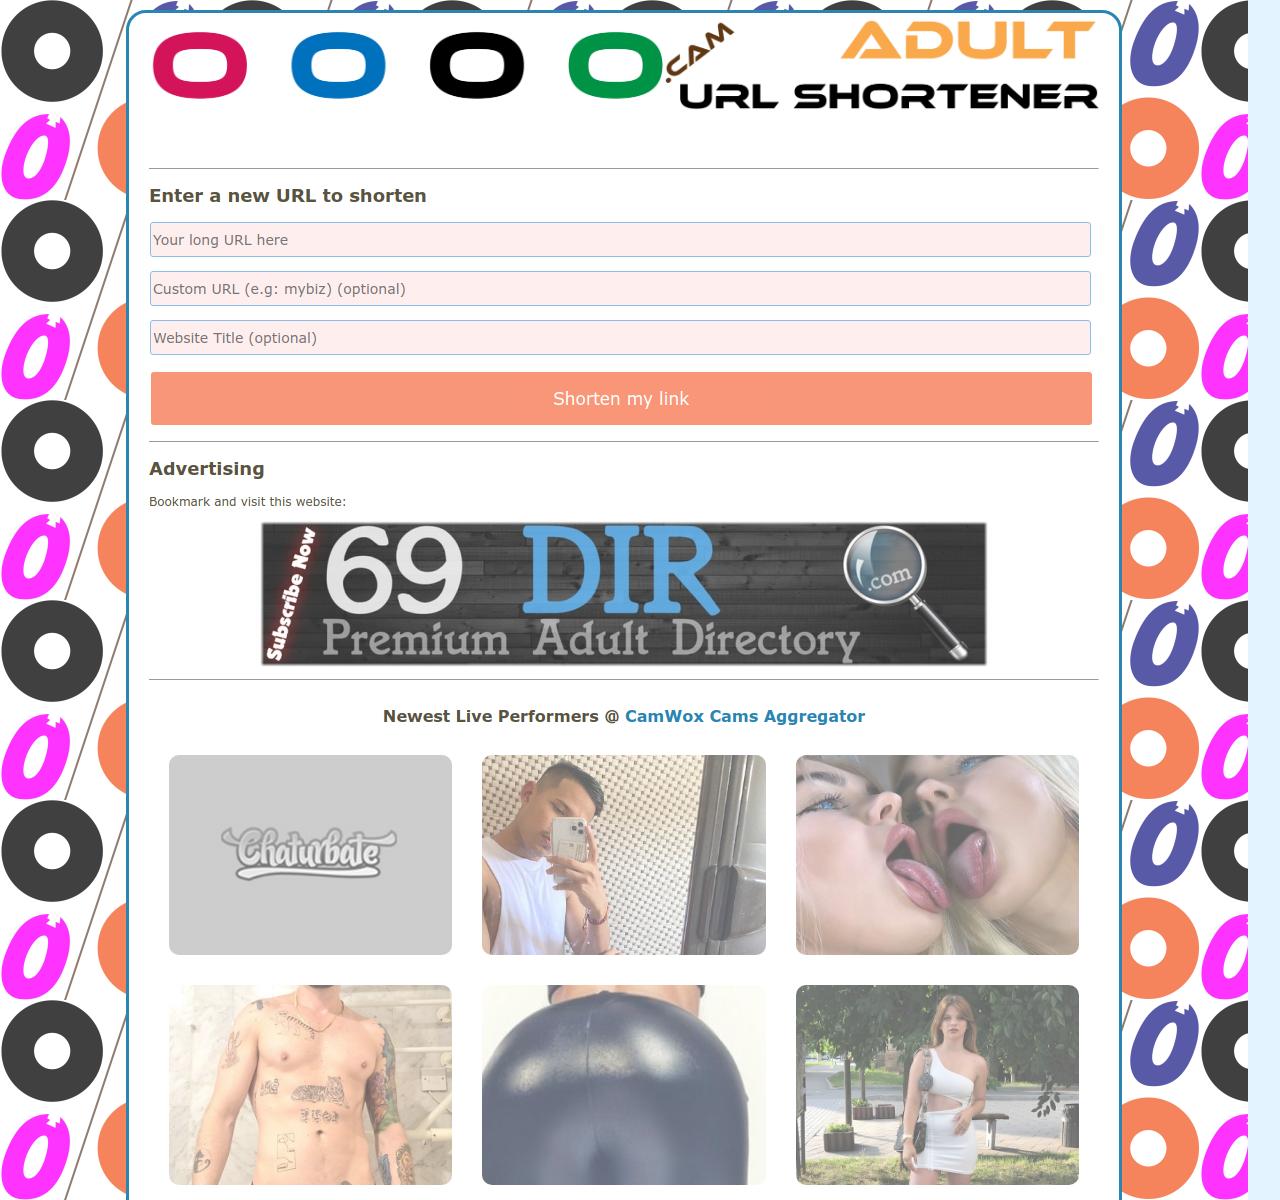 OOOO.cam - Adult URL Shortener without Ads